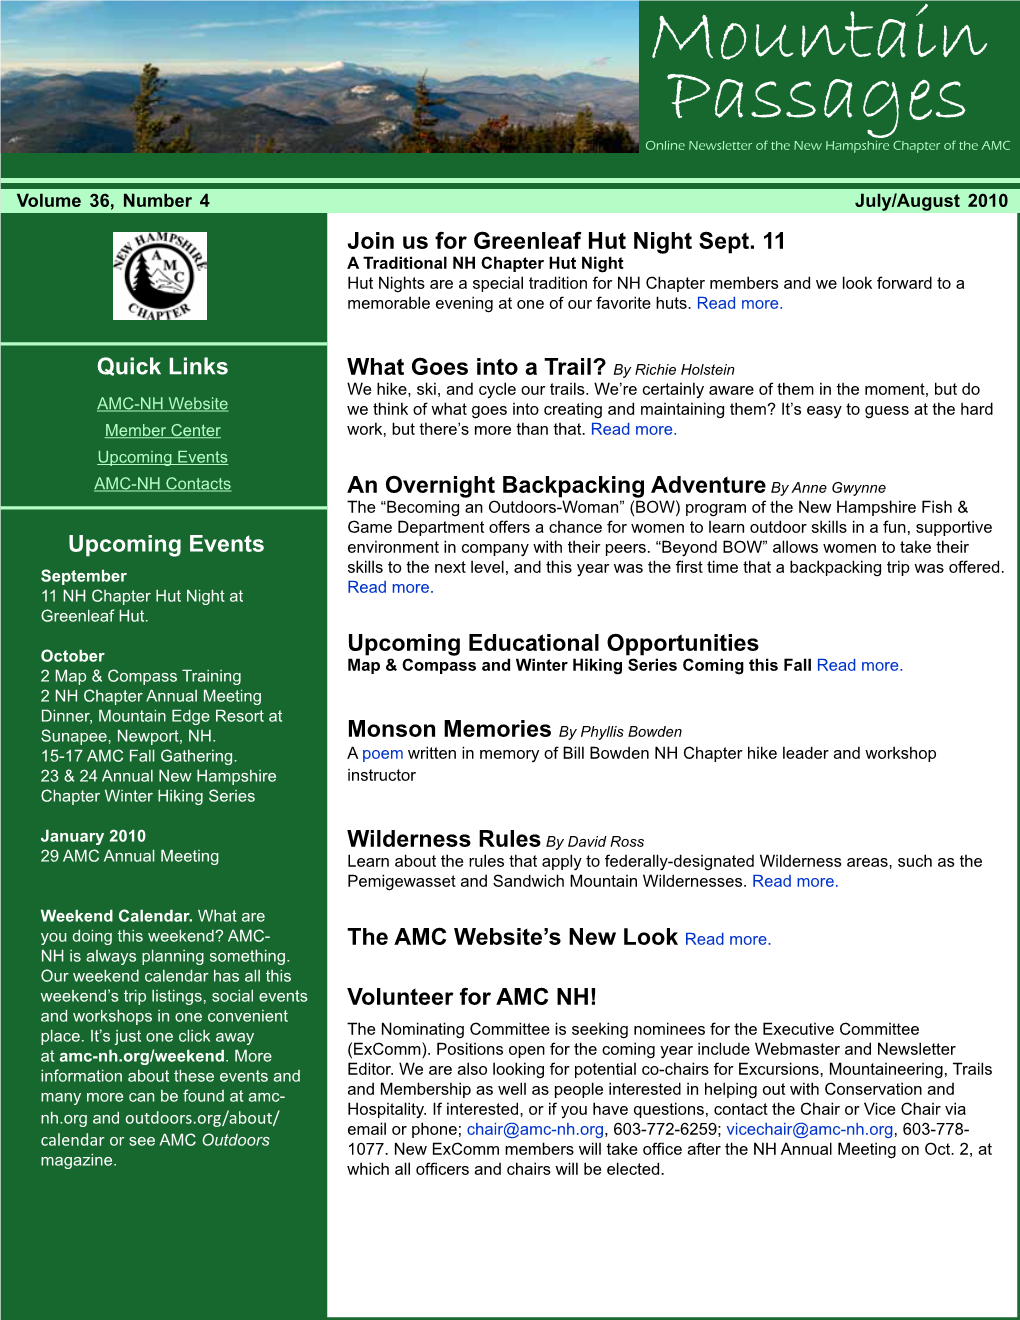 Mountain Passages Online Newsletter of the New Hampshire Chapter of the AMC